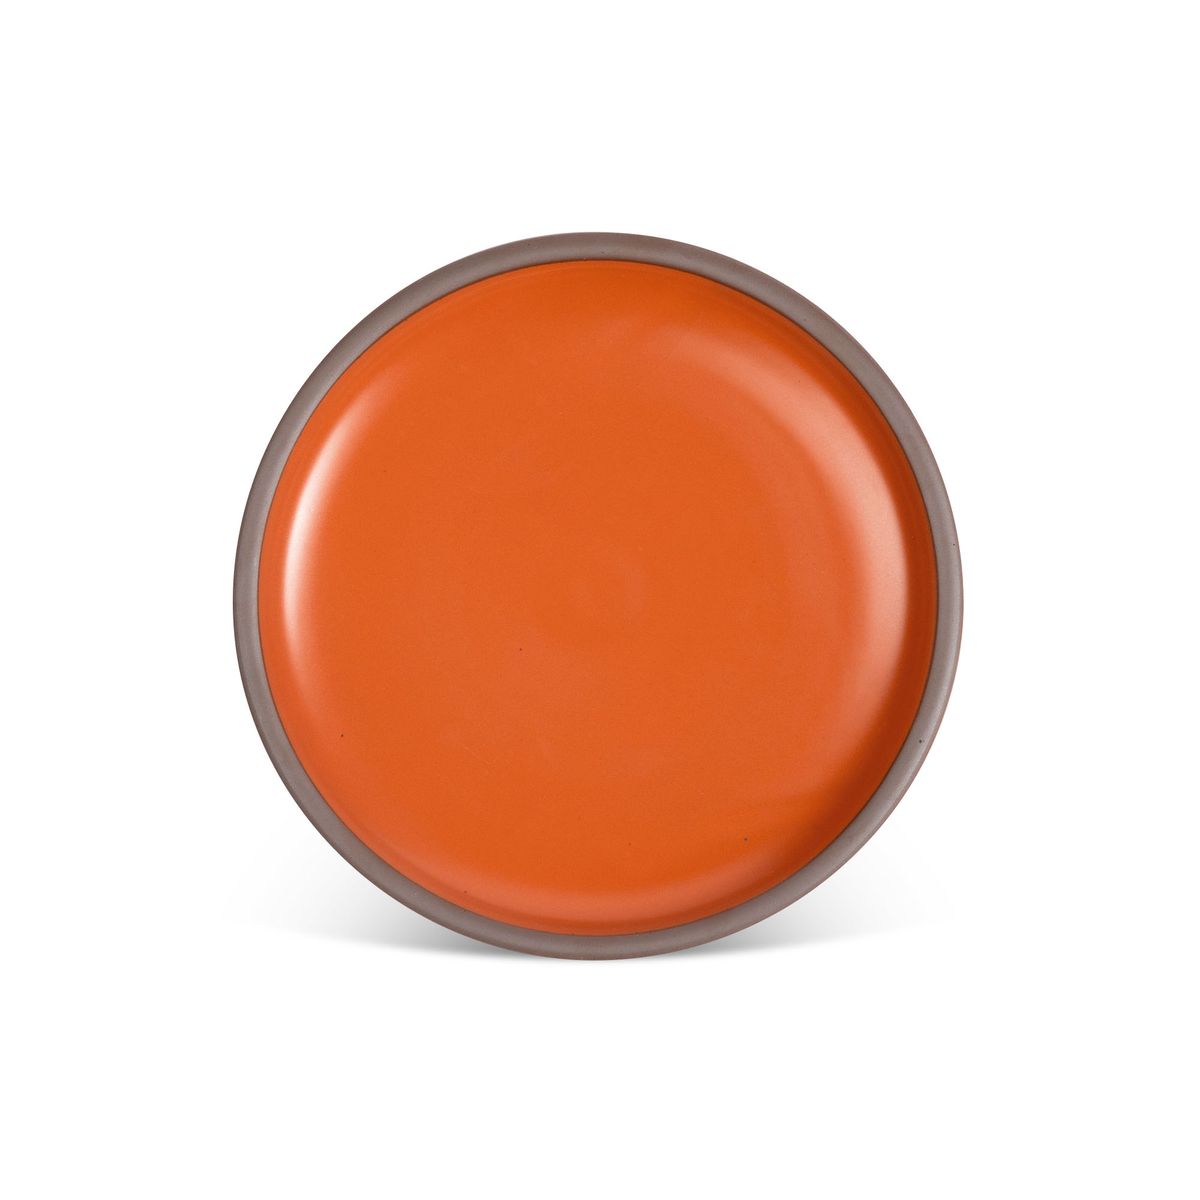 A dinner sized ceramic plate in a bold orange color featuring iron speckles and an unglazed rim